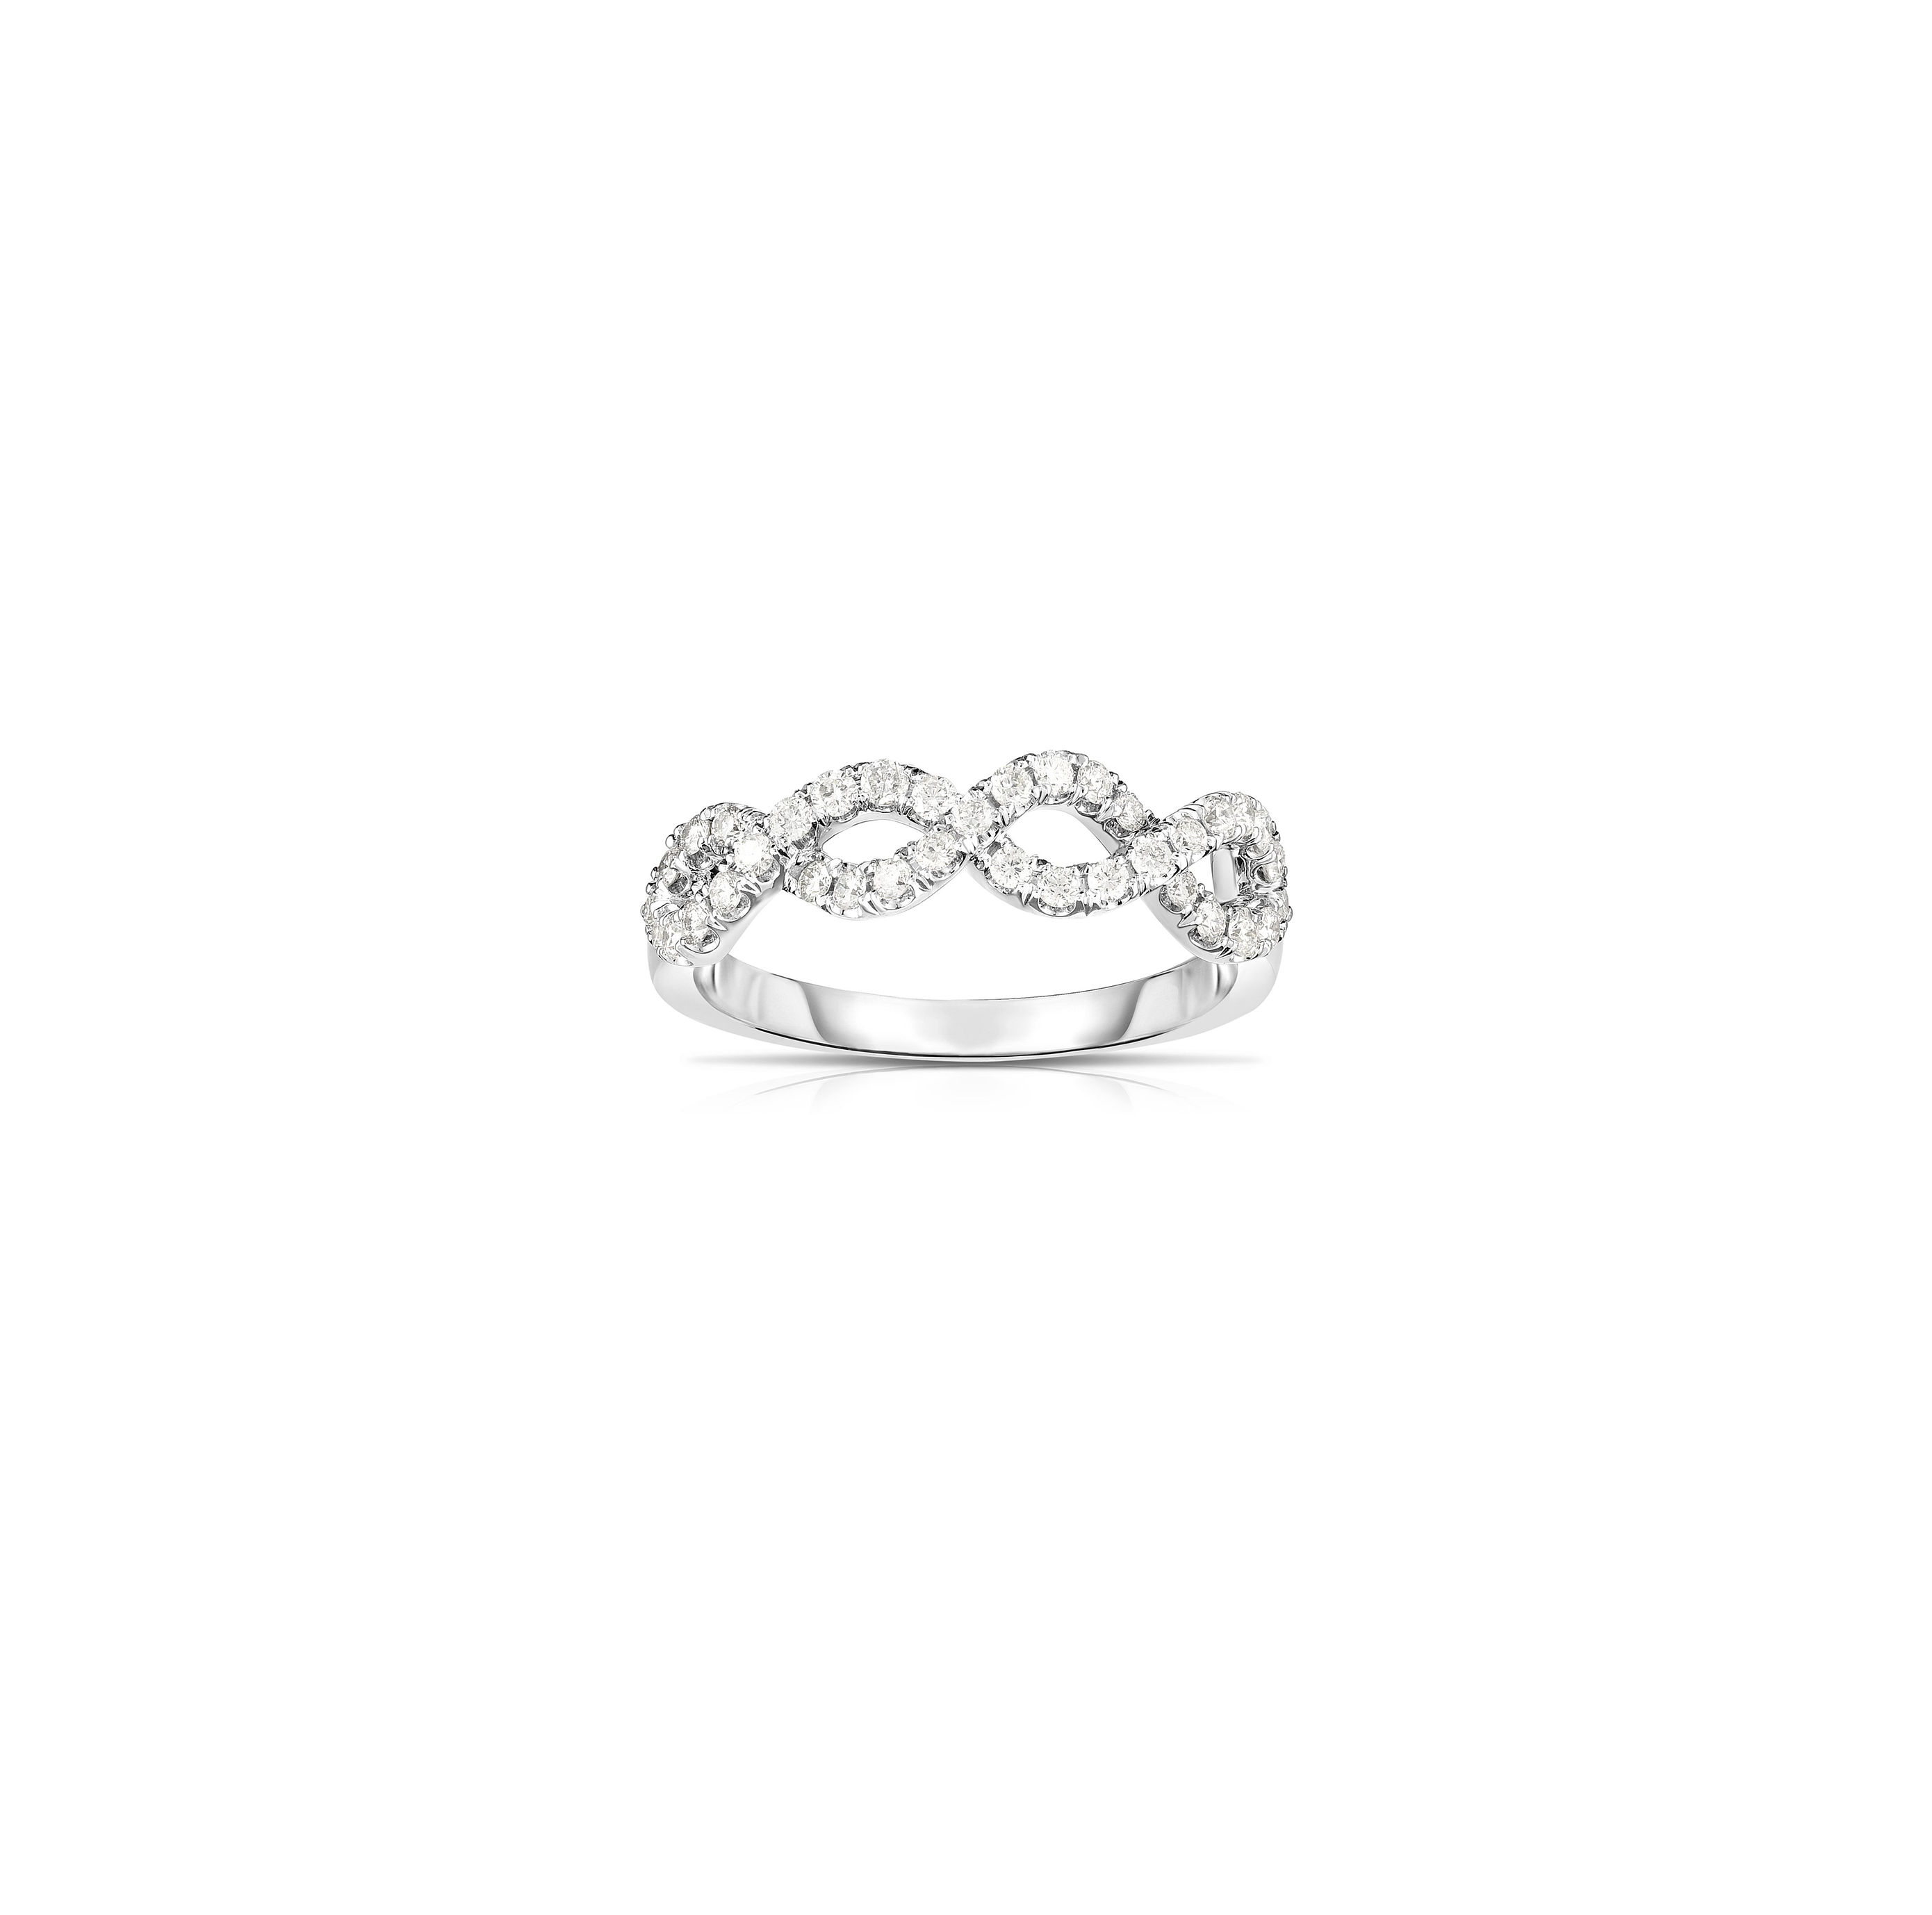 9ct White Gold Quarter Carat Diamond Twist Solitaire Engagement Ring -  White Gold Rings at Elma UK Jewellery